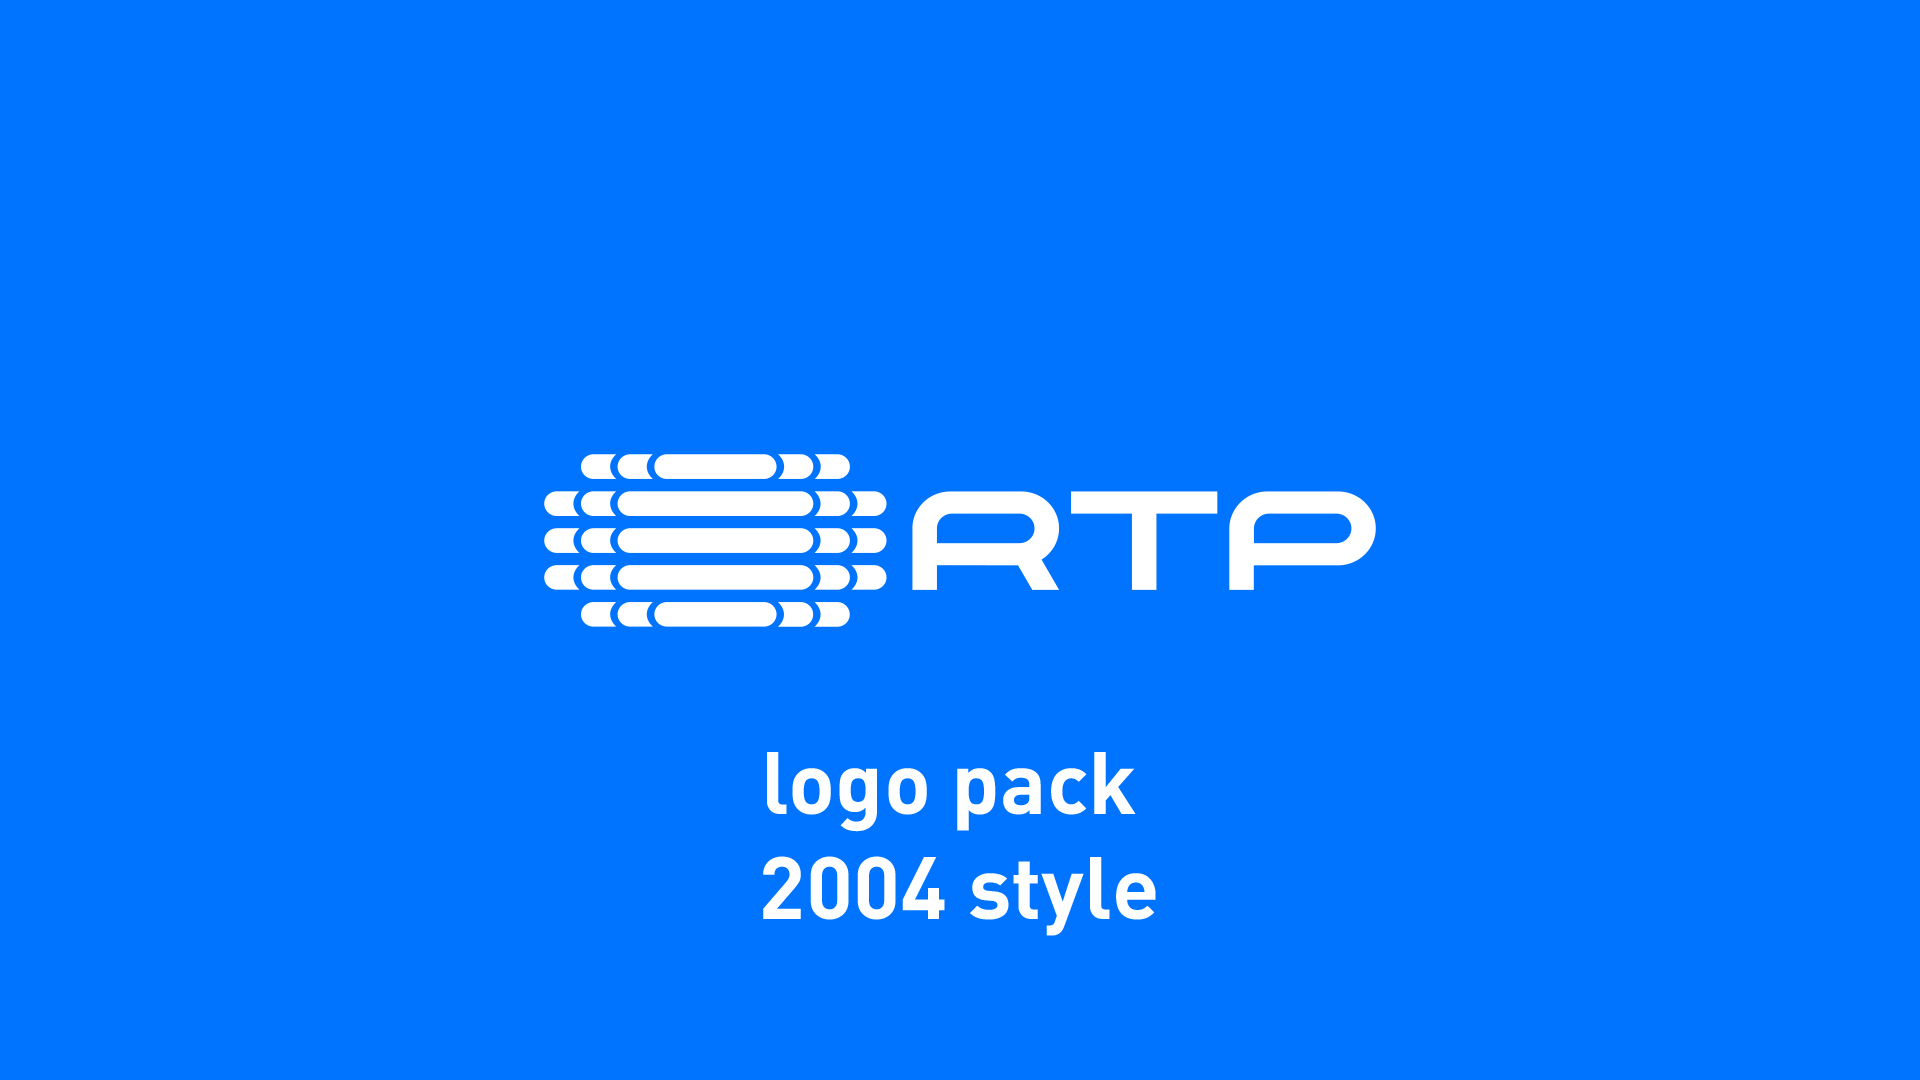 New look like old (but vice versa) - RTP logo pack by AppleDroidYT on DeviantArt